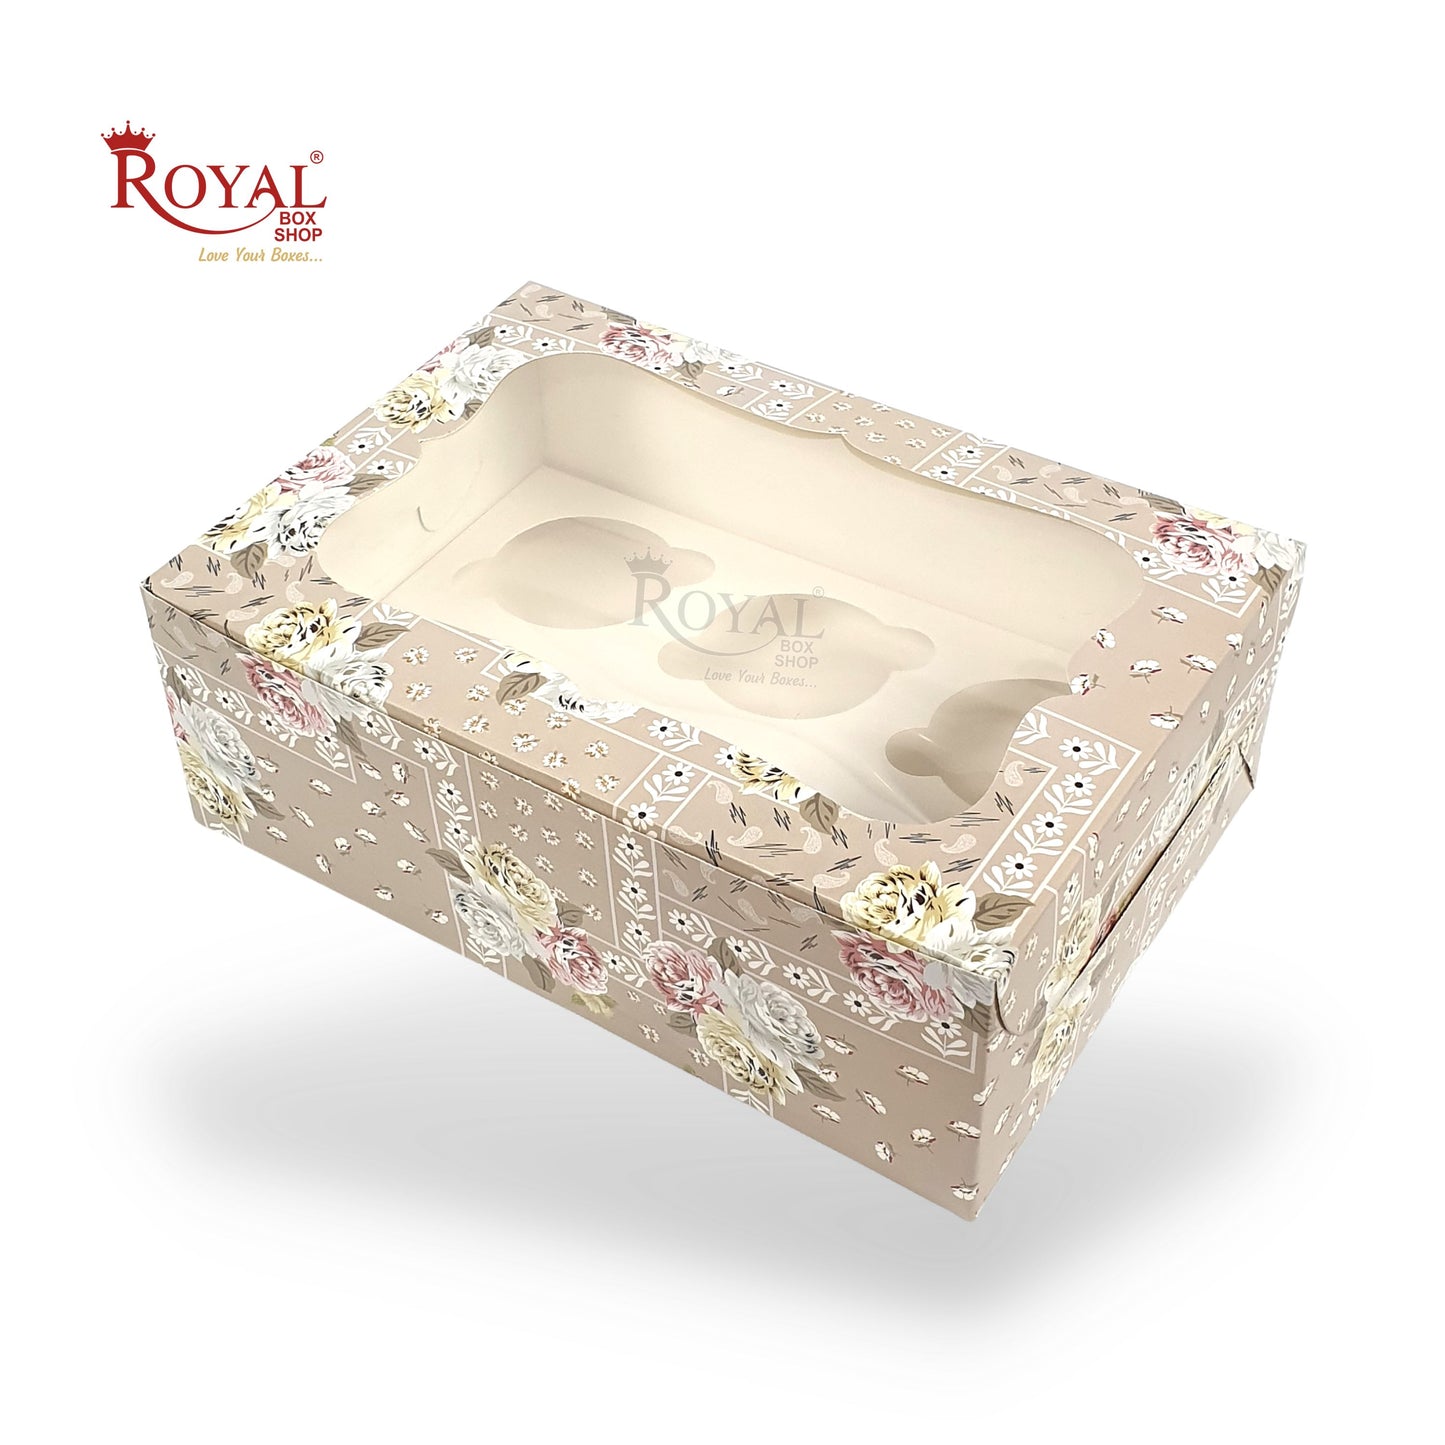 6pc Cupcake Box With Window I Size 10"x6.75"x3.5" I Flower Print I Perfect for Cupcakes, cookies